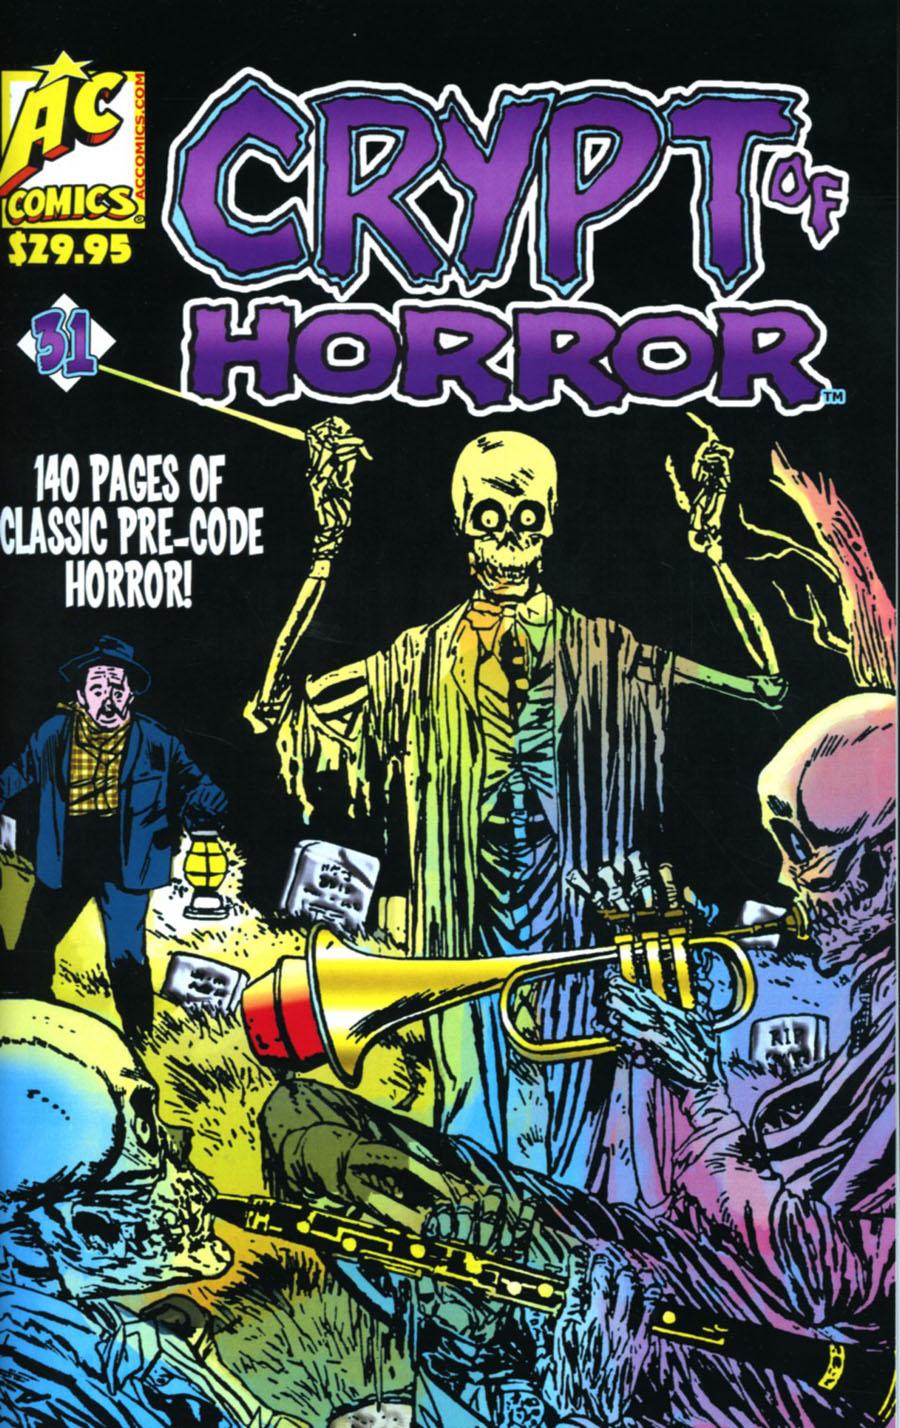 Crypt Of Horror Vol. 1 #31